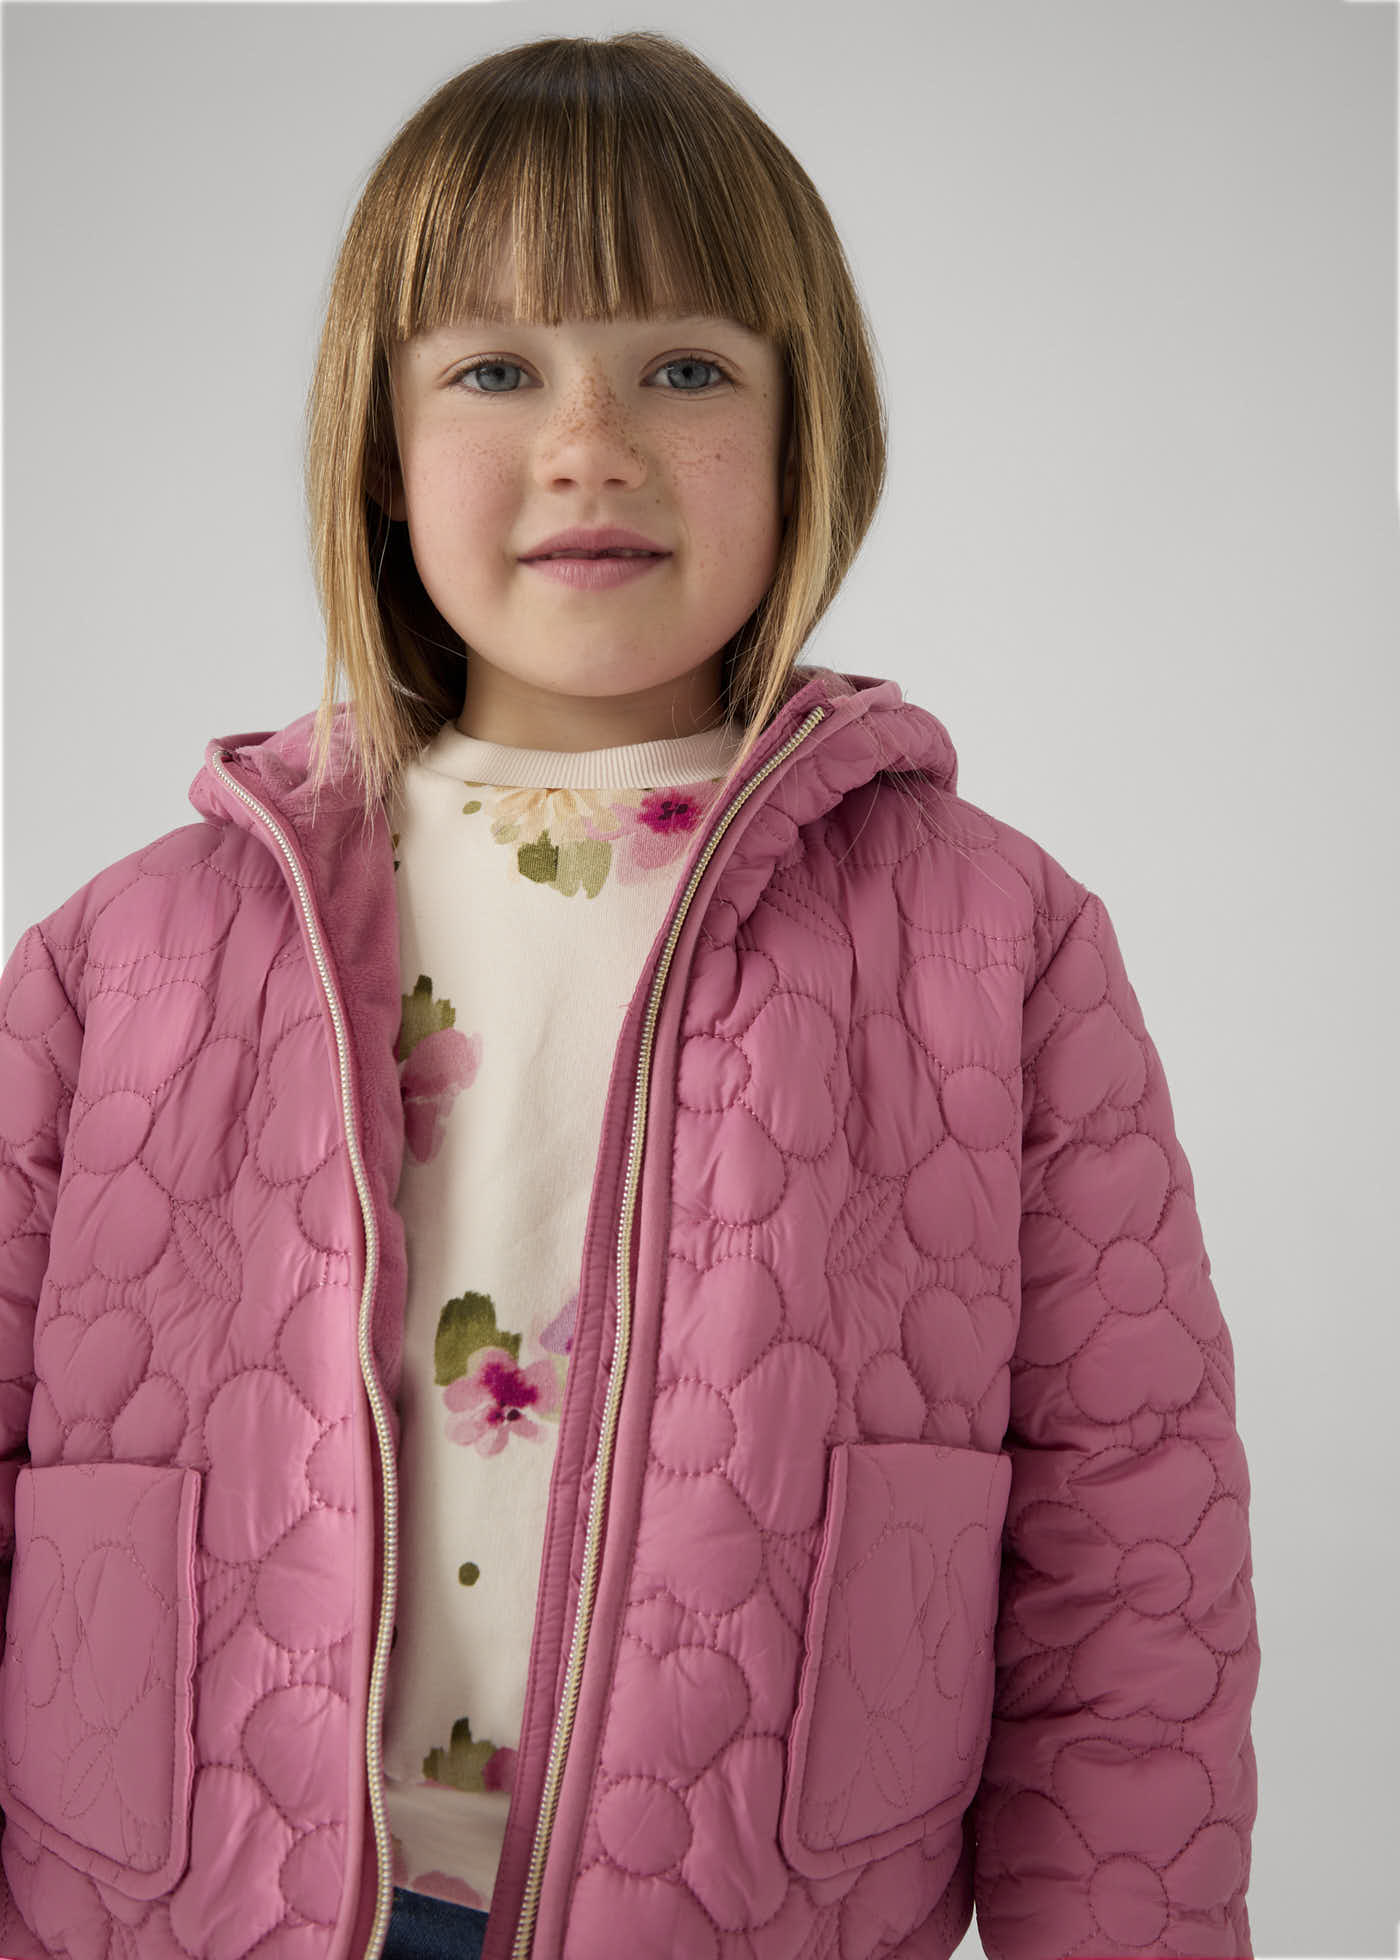 Floral puffer jacket for girls